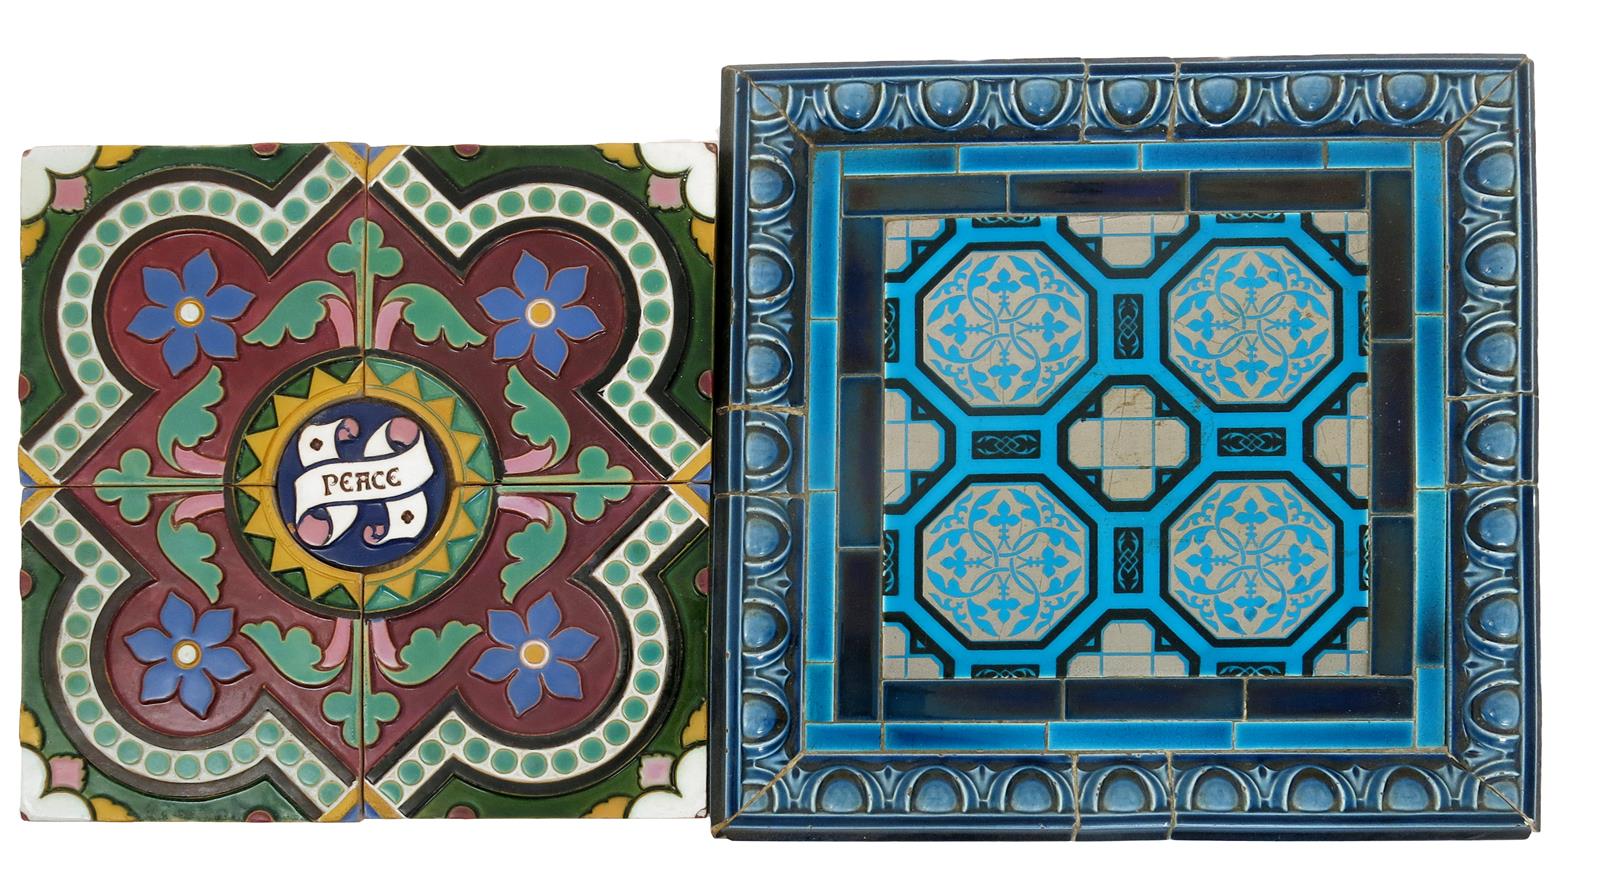 A Minton's four tile panel in the manner of A.W.N. Pugin, modelled in low relief with radiating